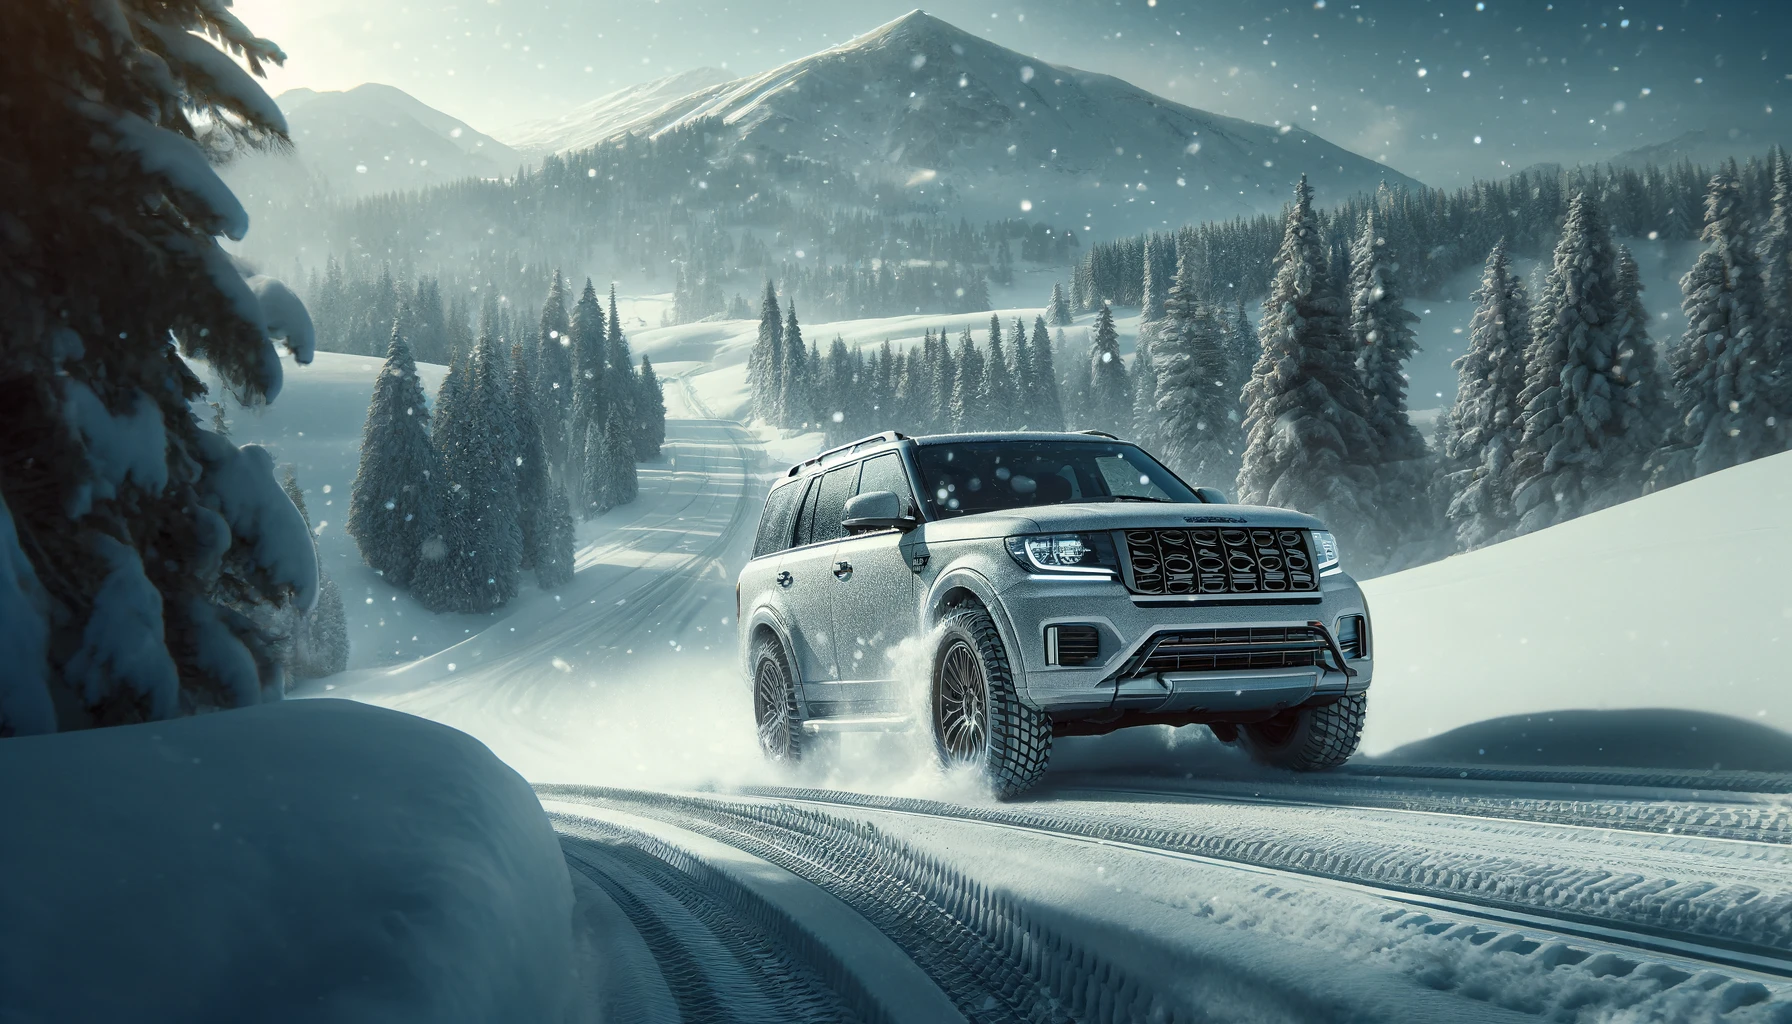 An evocative image depicting a vehicle equipped with Pirelli studded winter tires, traversing a snowy landscape. The scene captures a robust SUV, showcasing the strength and reliability of the tires as it confidently navigates a snow-covered mountain road. Snowflakes gently fall around the vehicle, emphasizing the harsh winter conditions and the tire's effectiveness in such environments. The snowy mountains and pine trees in the background create a picturesque winter setting, illustrating the ideal use case for these tires. The image is in a 16:9 aspect ratio.